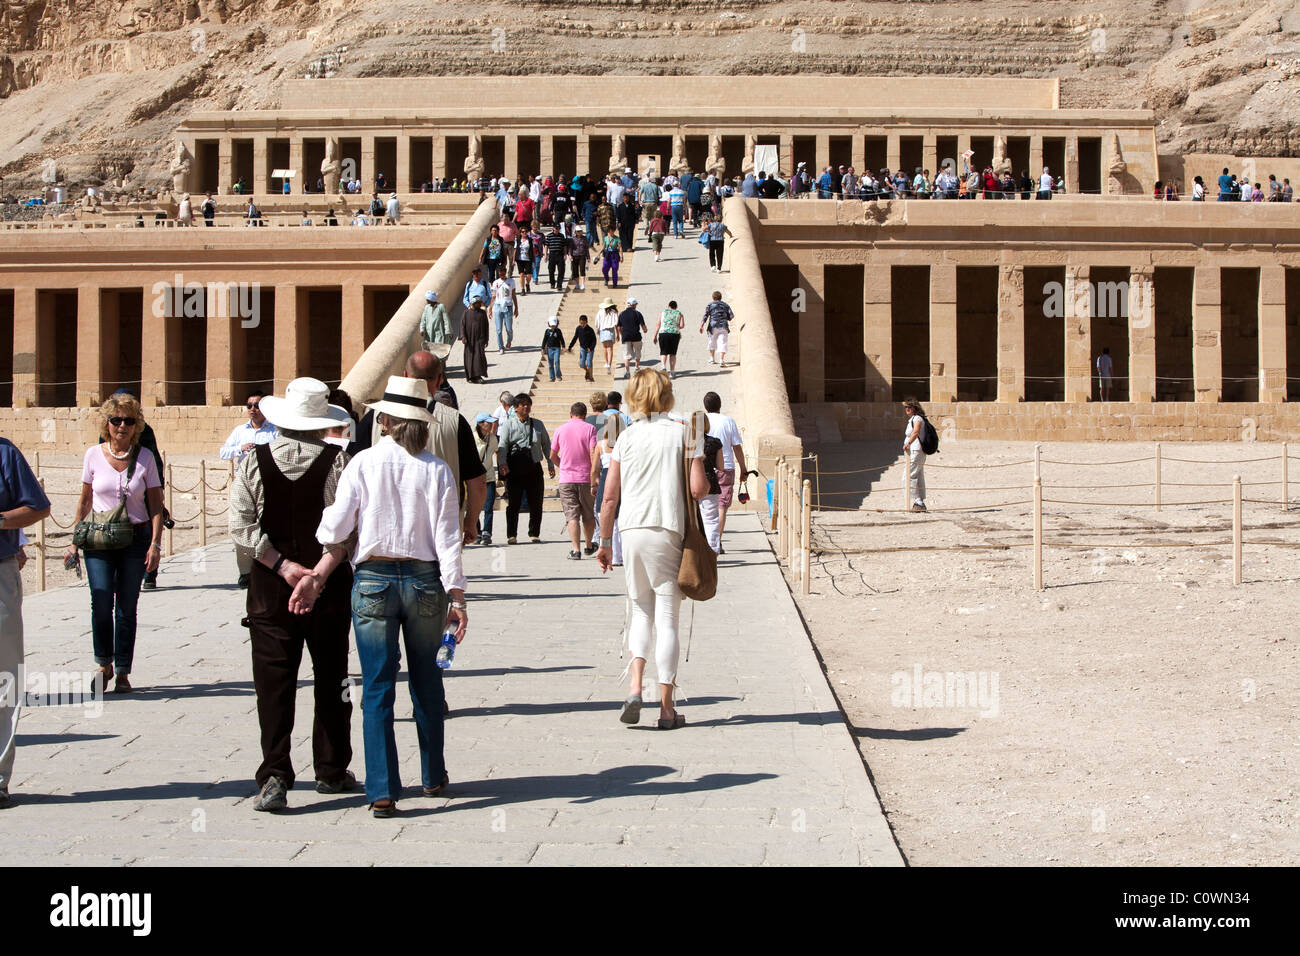 The Temple of Hatshepsut in the Deir al Bahri is a major tourist stop for many Nile Valley  tour groups. Stock Photo